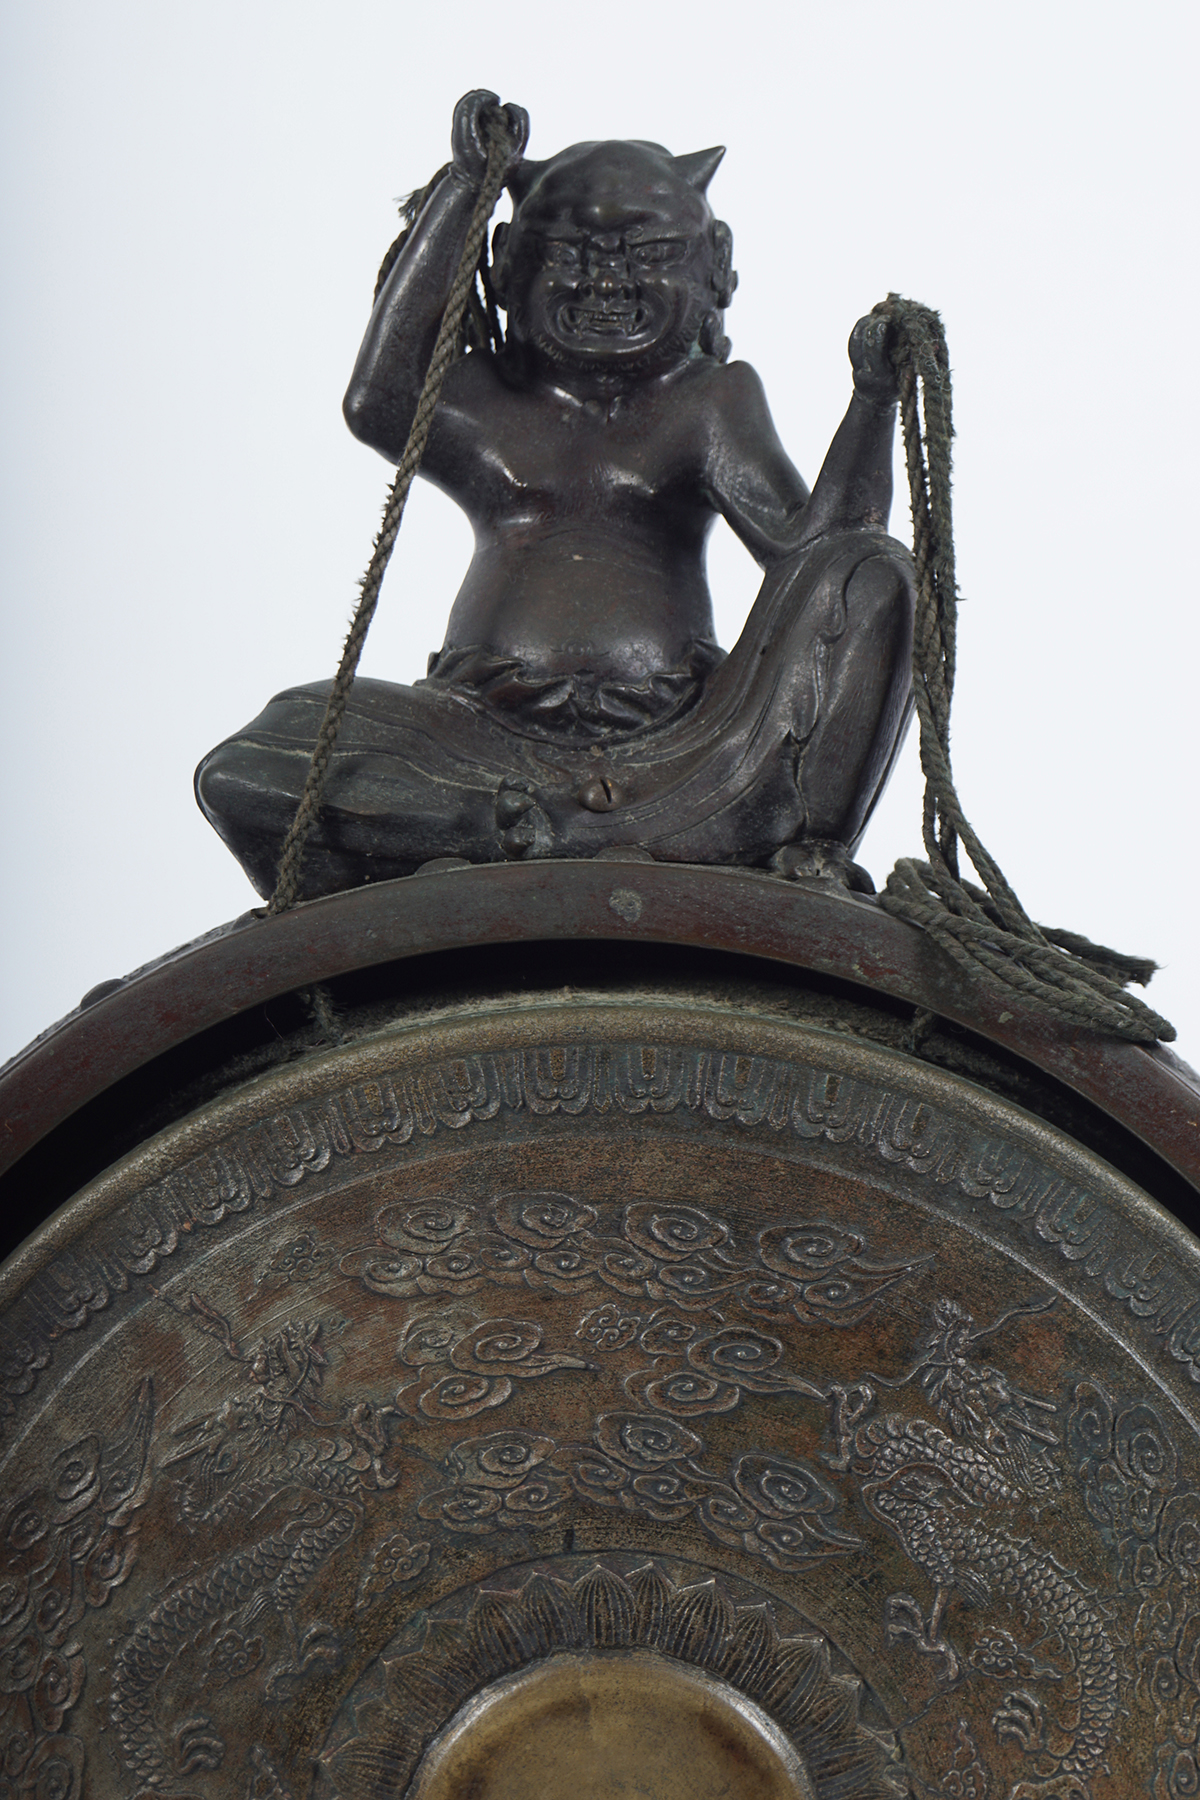 19TH-CENTURY JAPANESE BRONZE GONG - Image 2 of 5